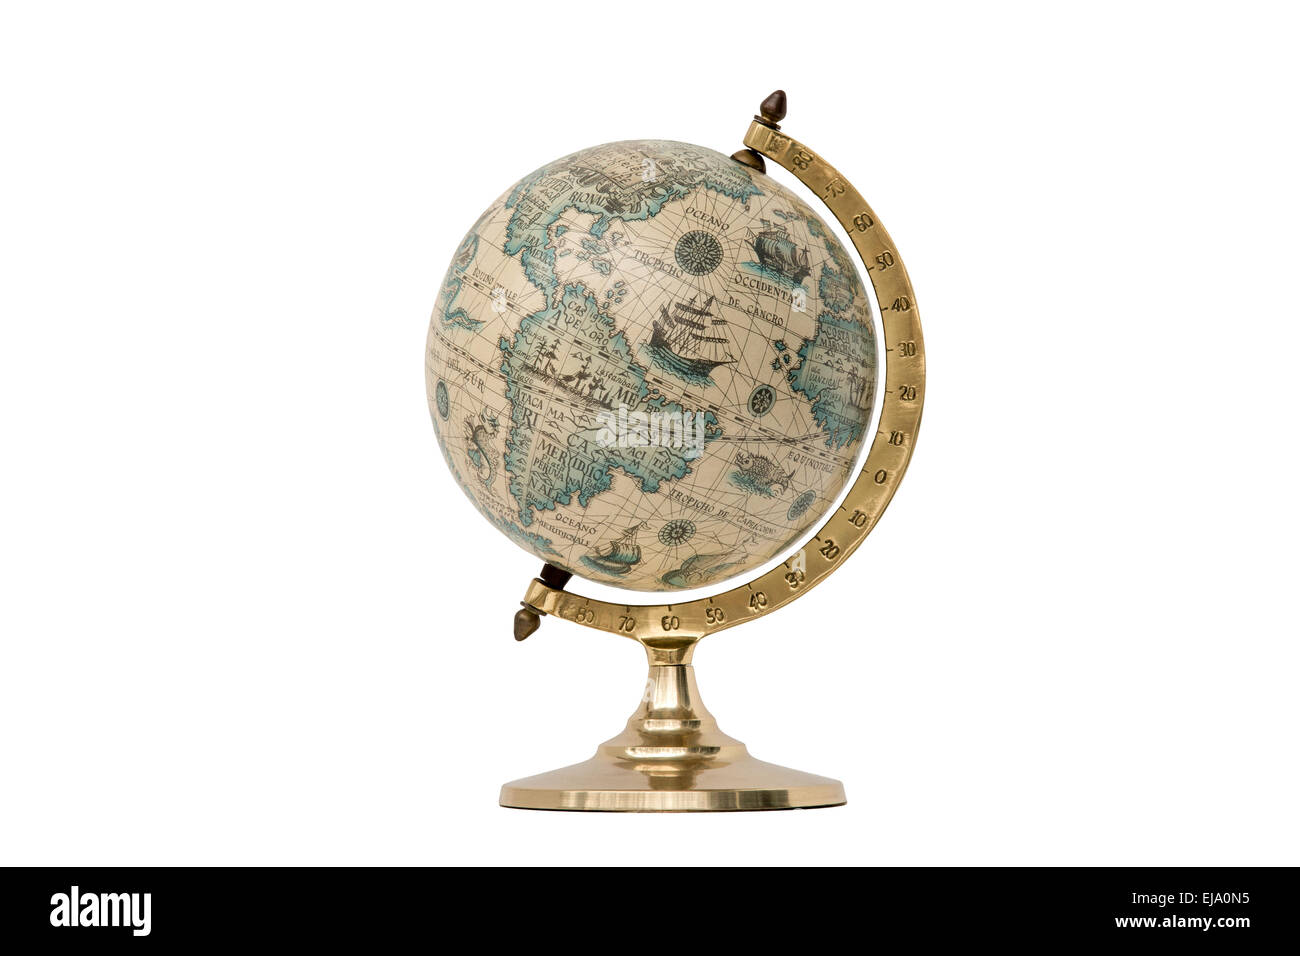 Antique world globe isolated on white background.  Studio close-up.  Showing North America and South America. Stock Photo